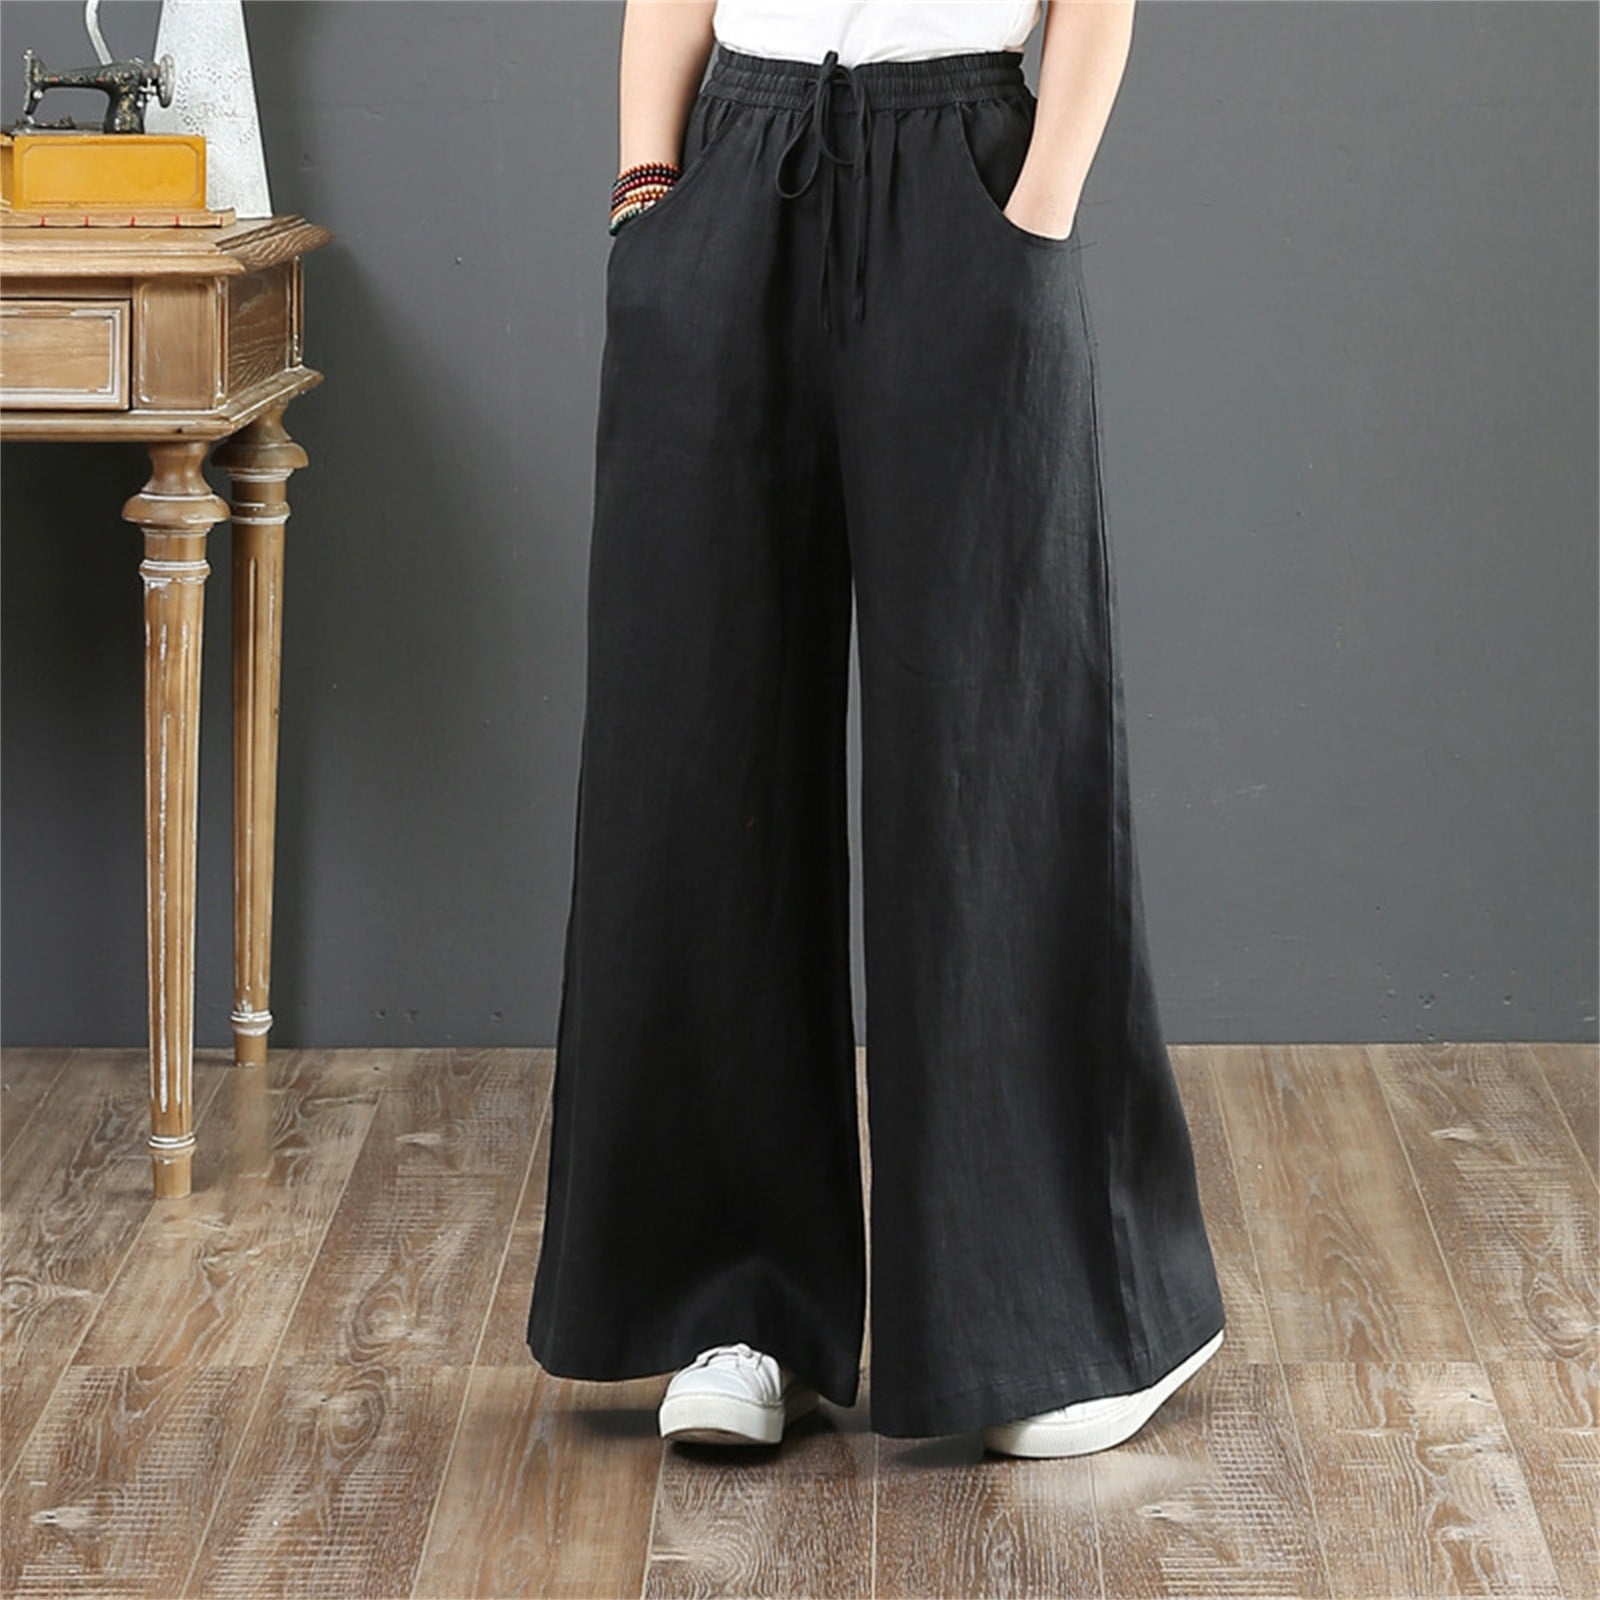 nsendm Women Summer High Waisted Linen Palazzo Pants Long Bottom Trousers  Summer Pants for Women Casual for Curvy Women Pants Black XX-Large 